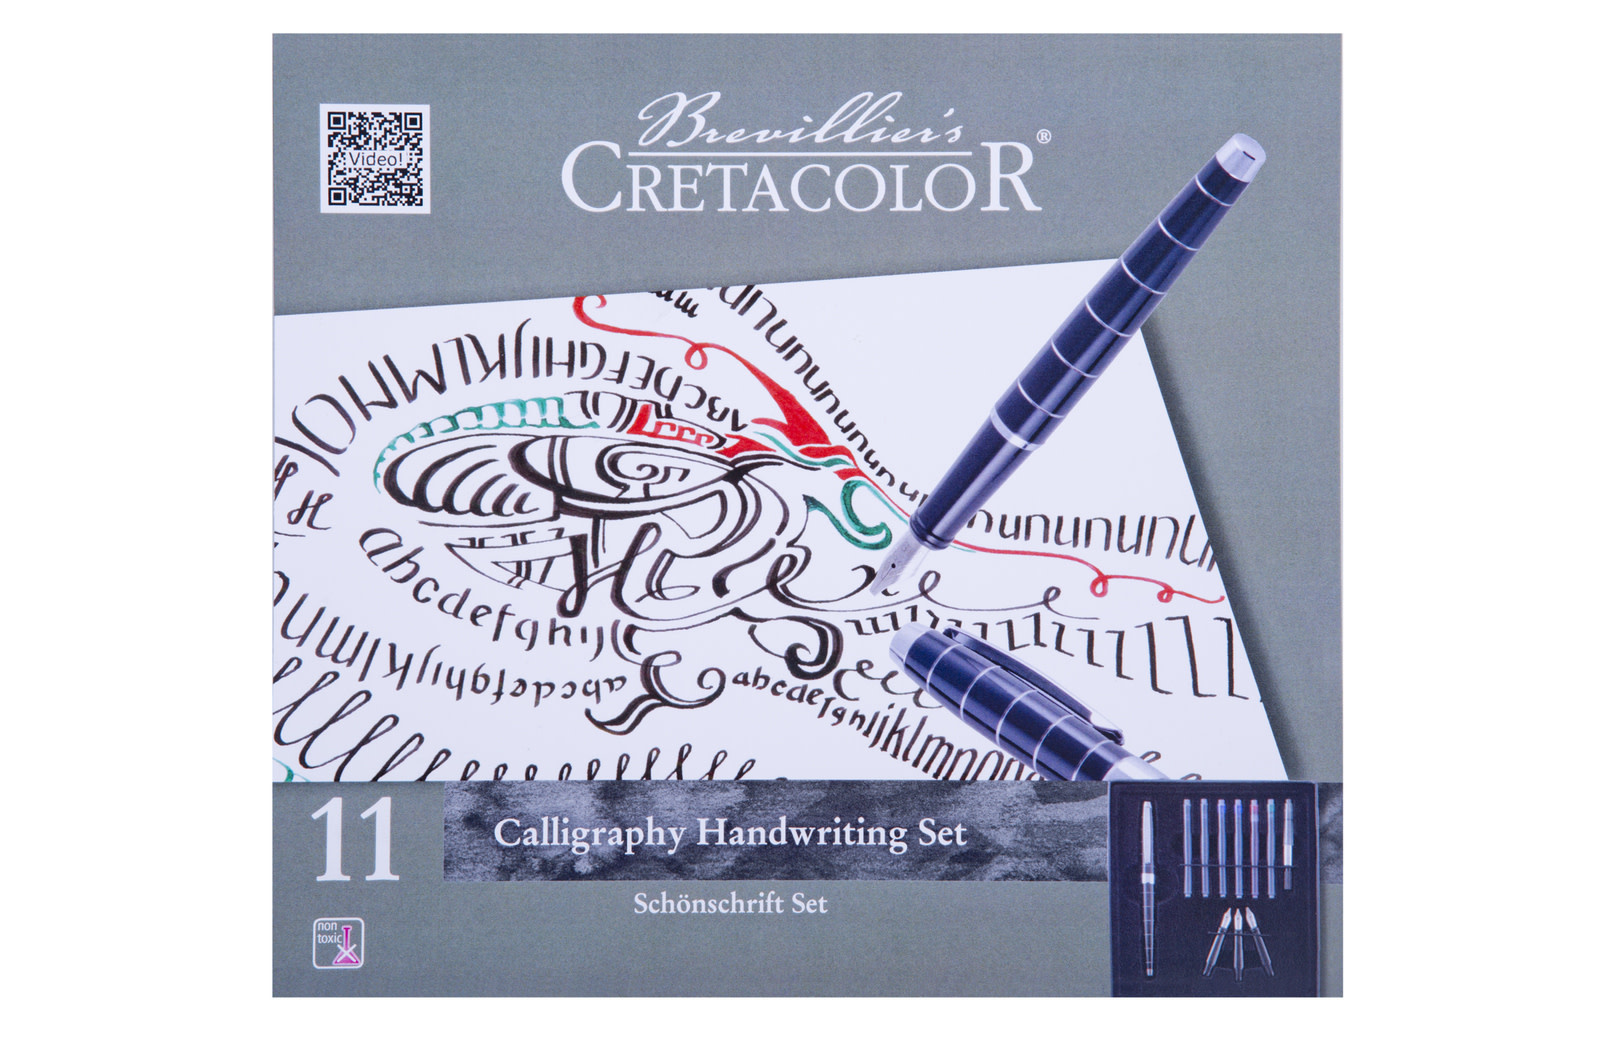 Brevellier's Calligraphy Writing Set, 11 Piece